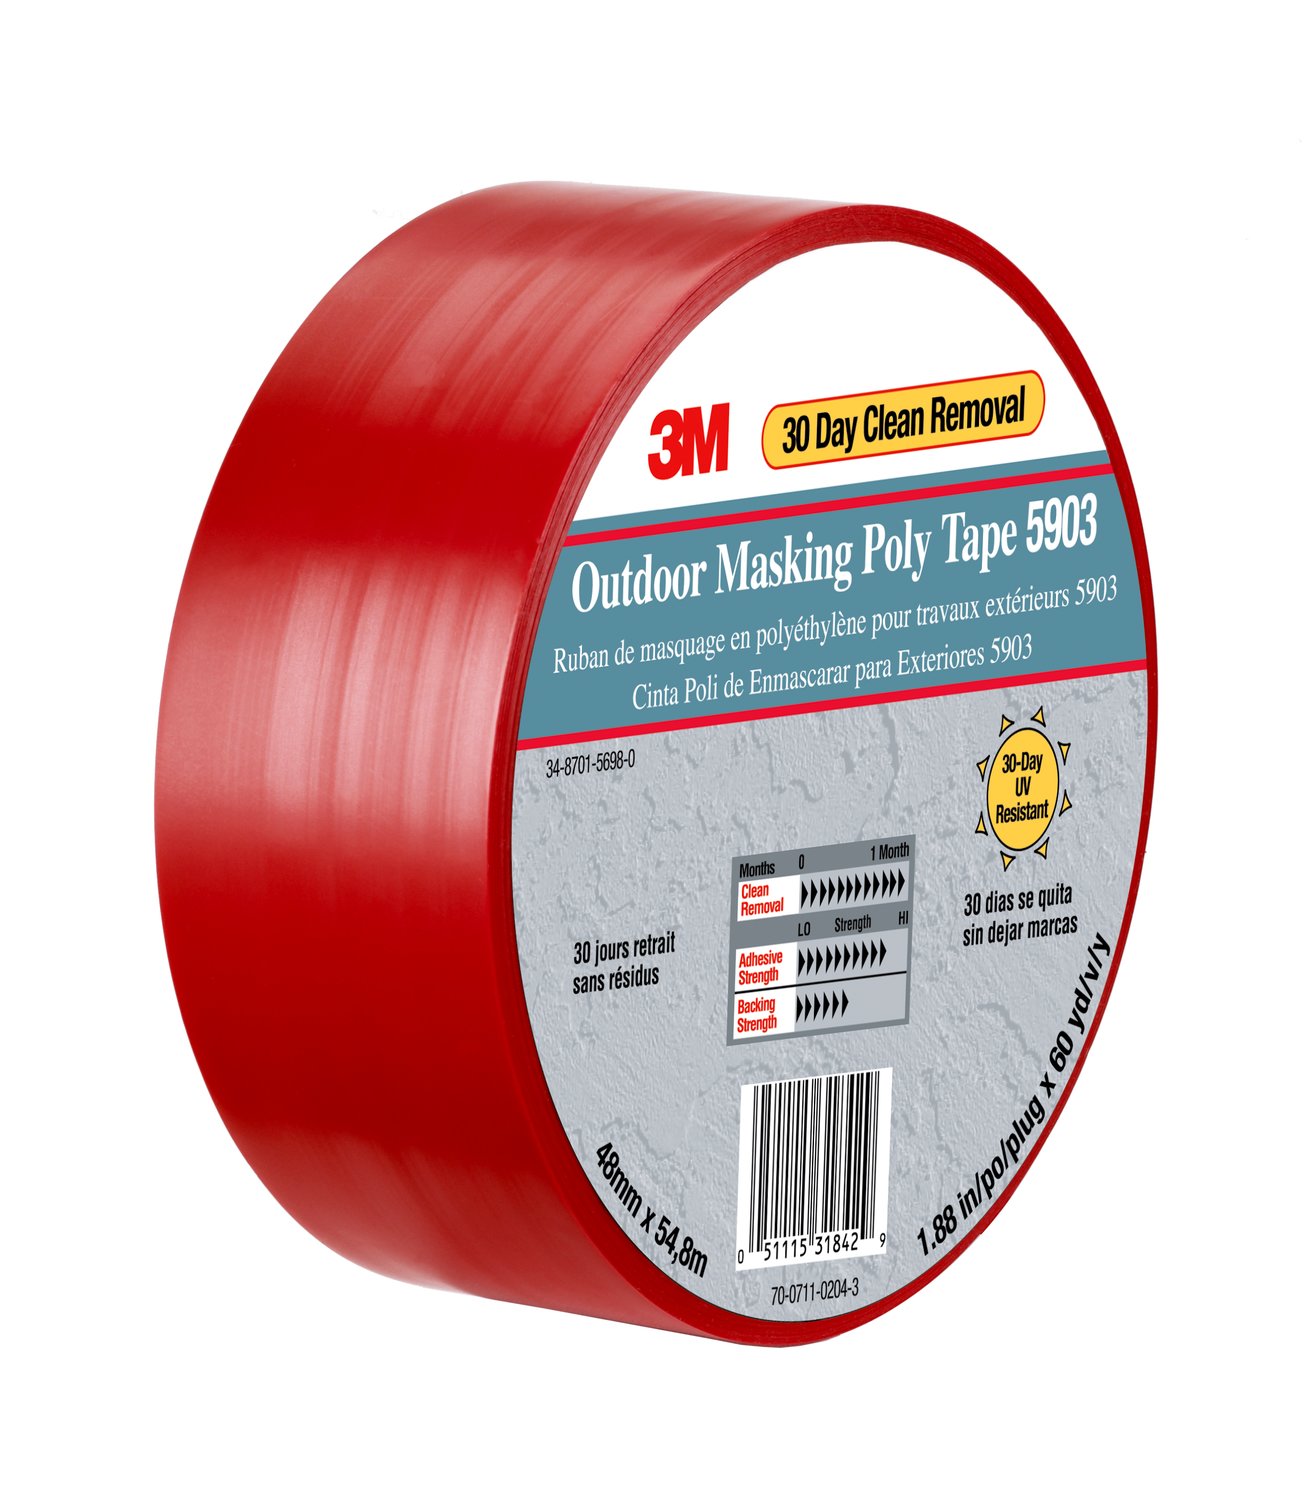 7010295459 - 3M Outdoor Masking Poly Tape 5903, Red, 50 in x 60 yd, 4/Case